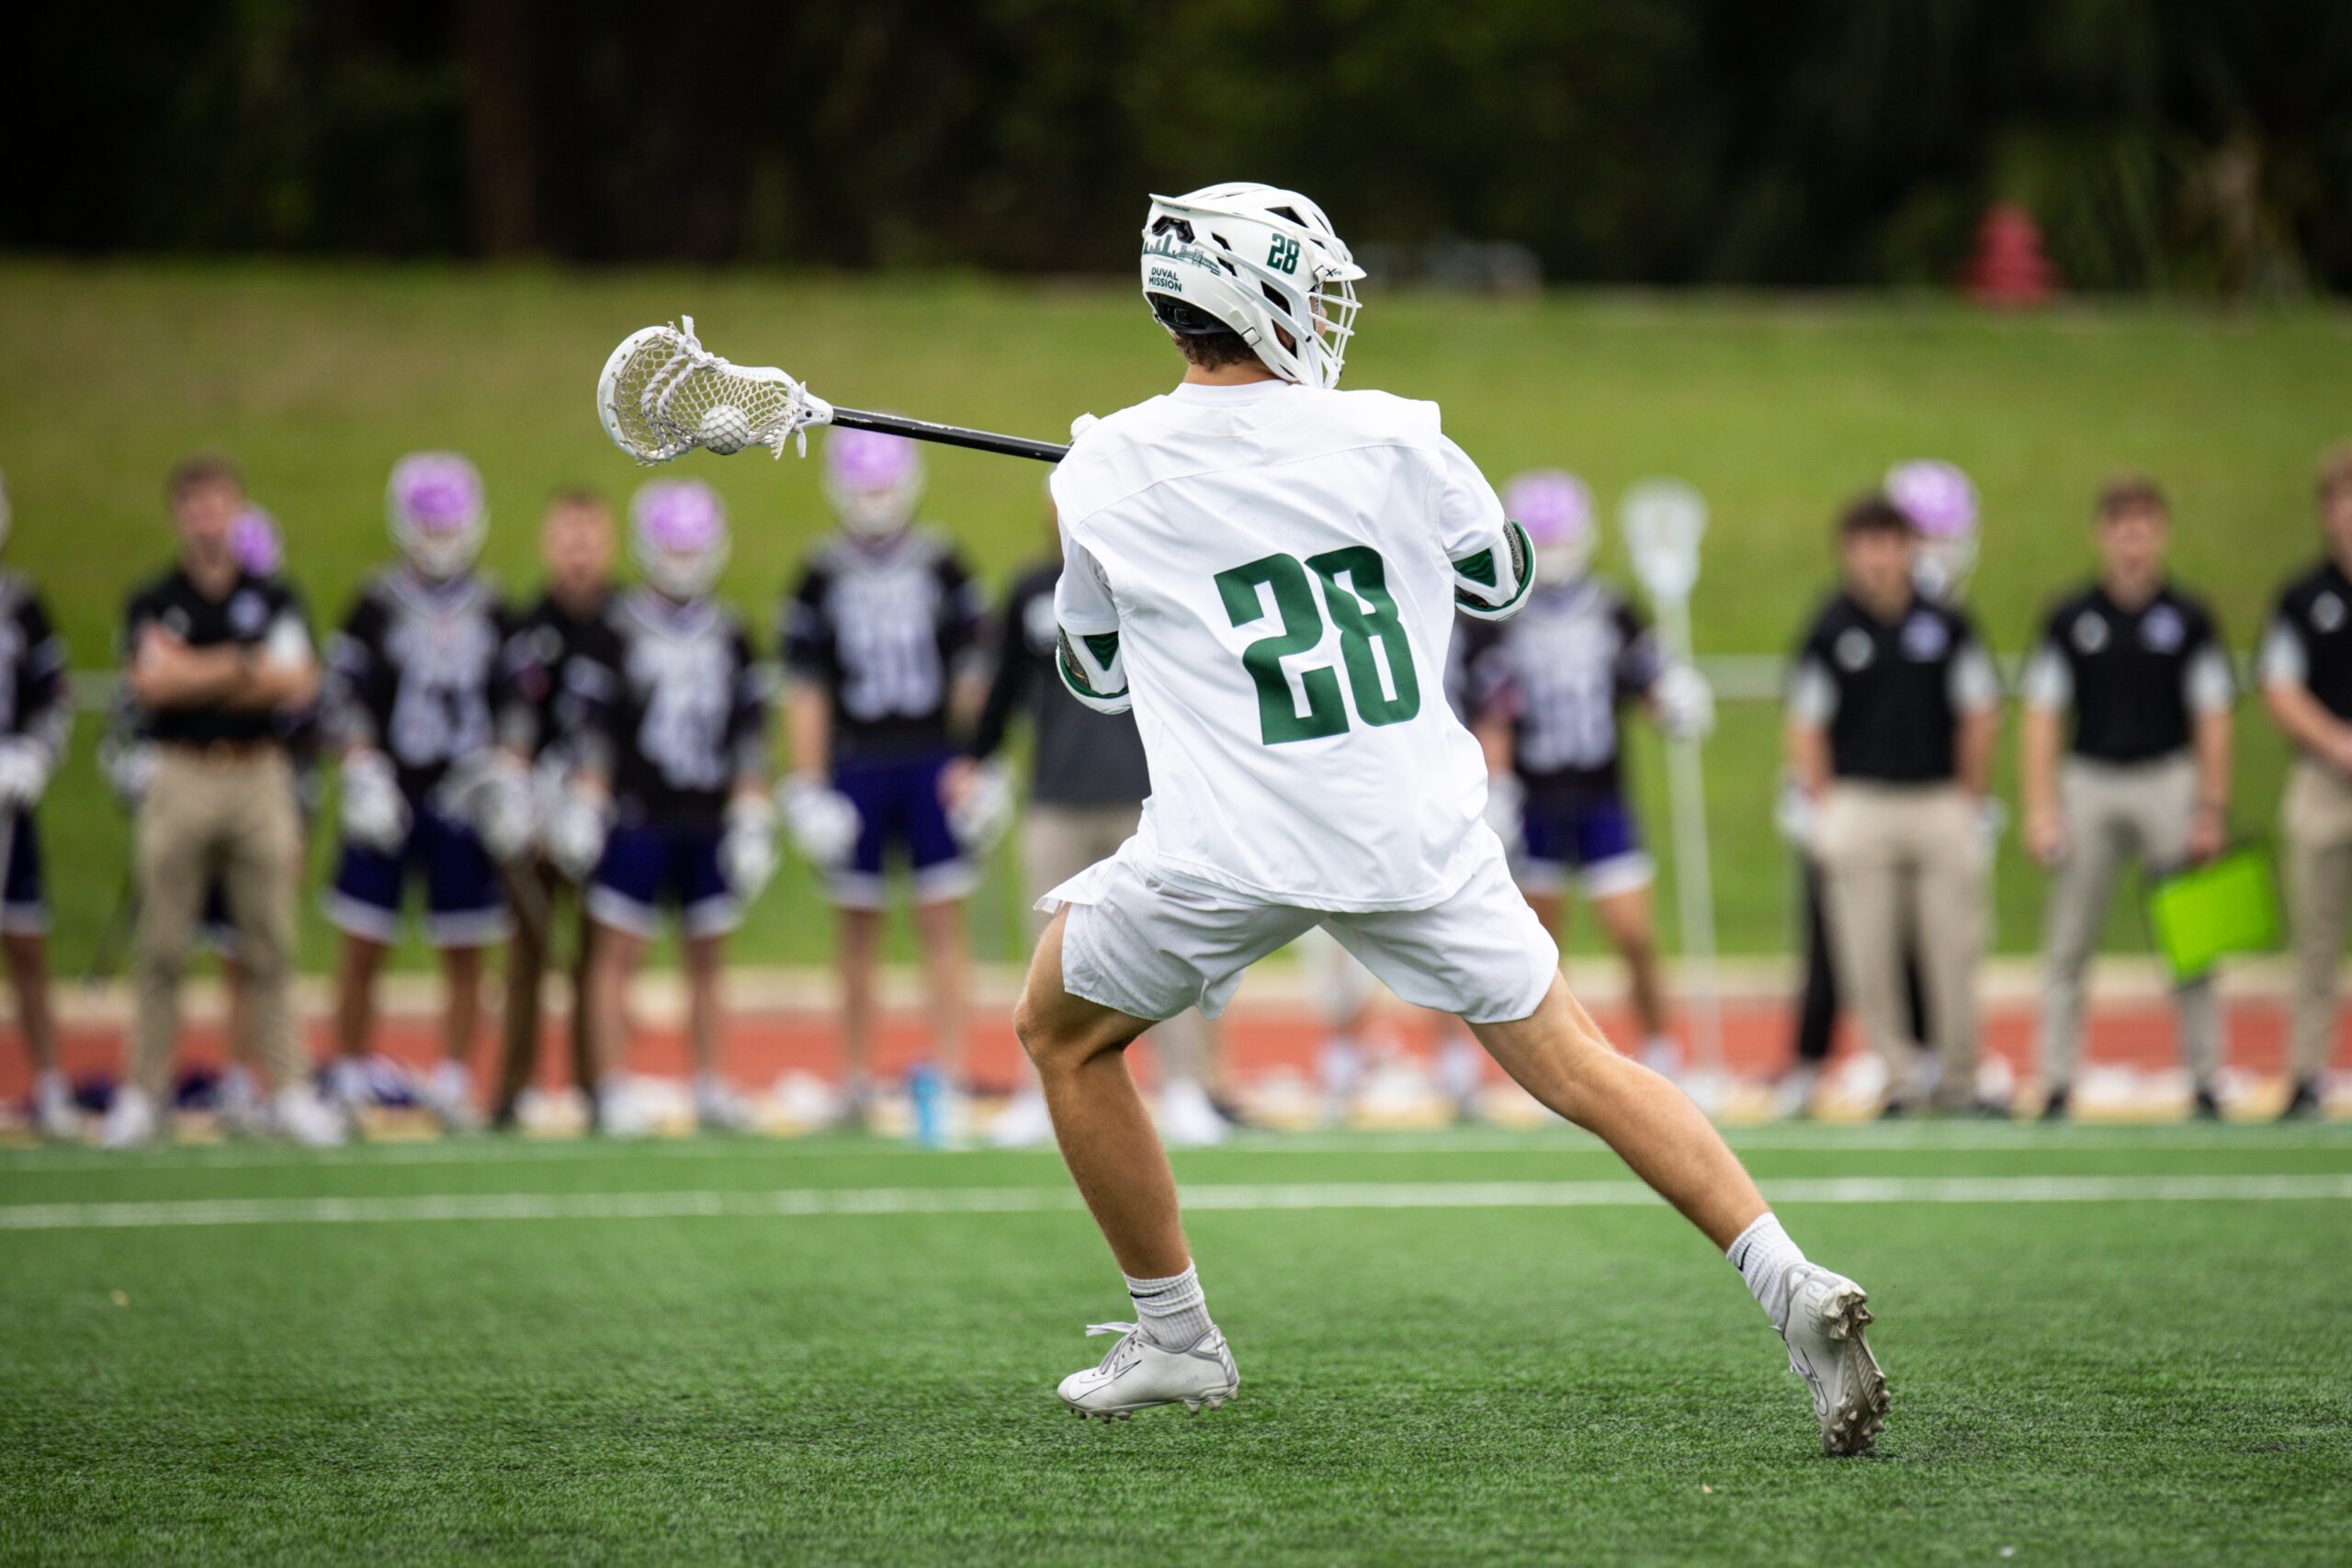 A college sports lacrosse player in white stands ready to pass the ball held in his stick’s pocket. 